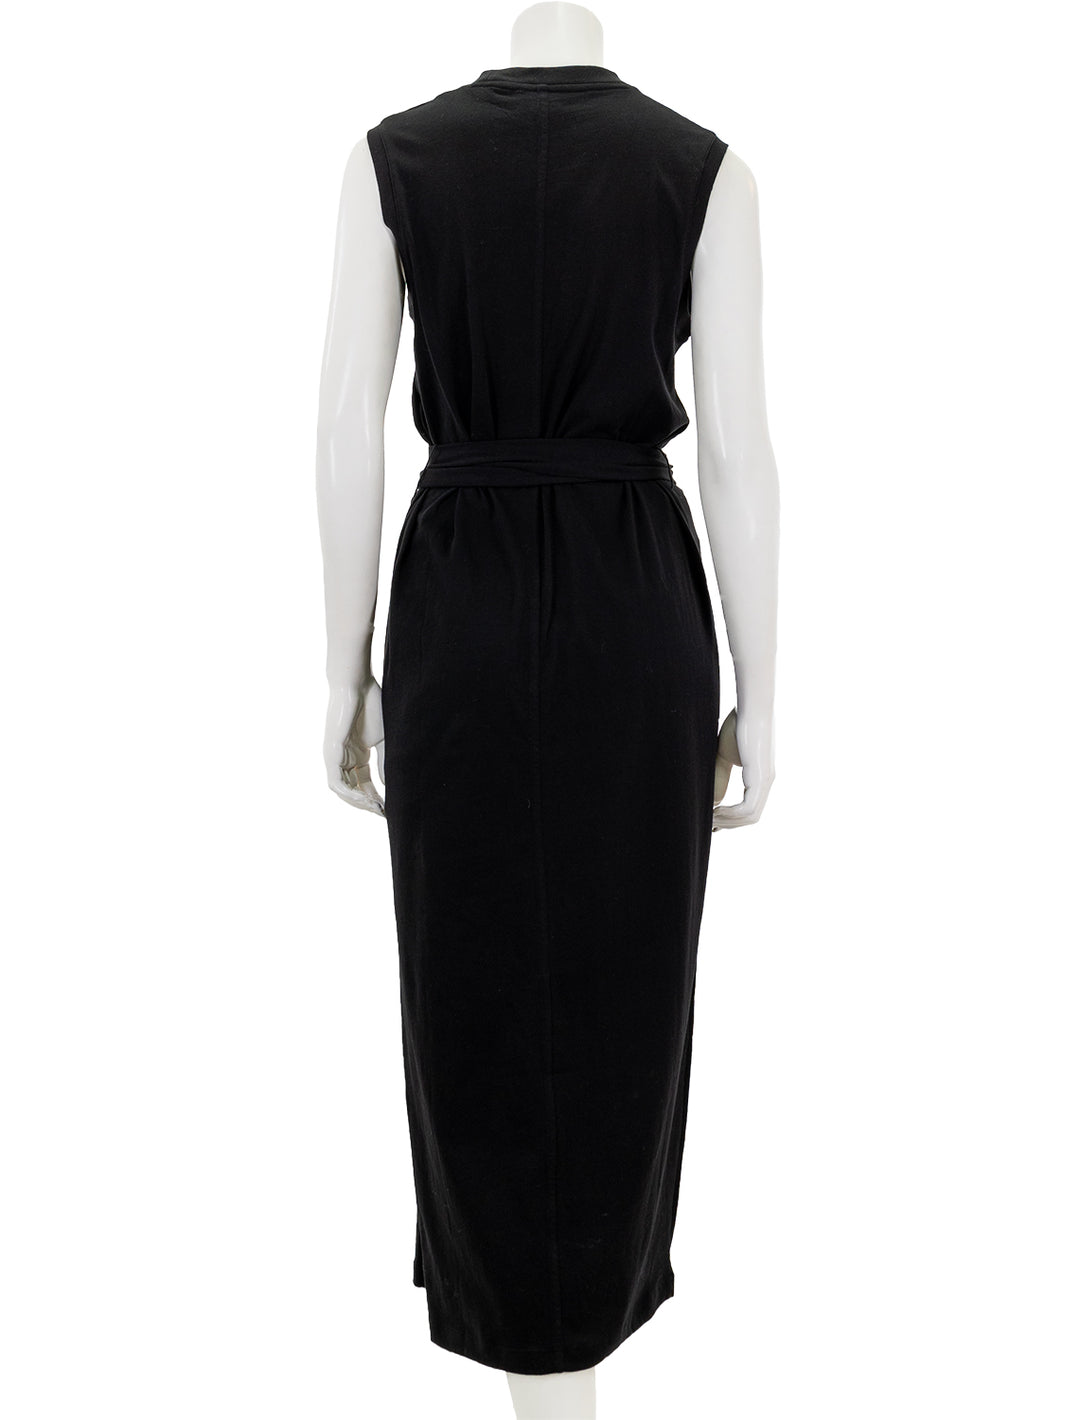 Back view of Vince's sleeveless knit wrap dress in black